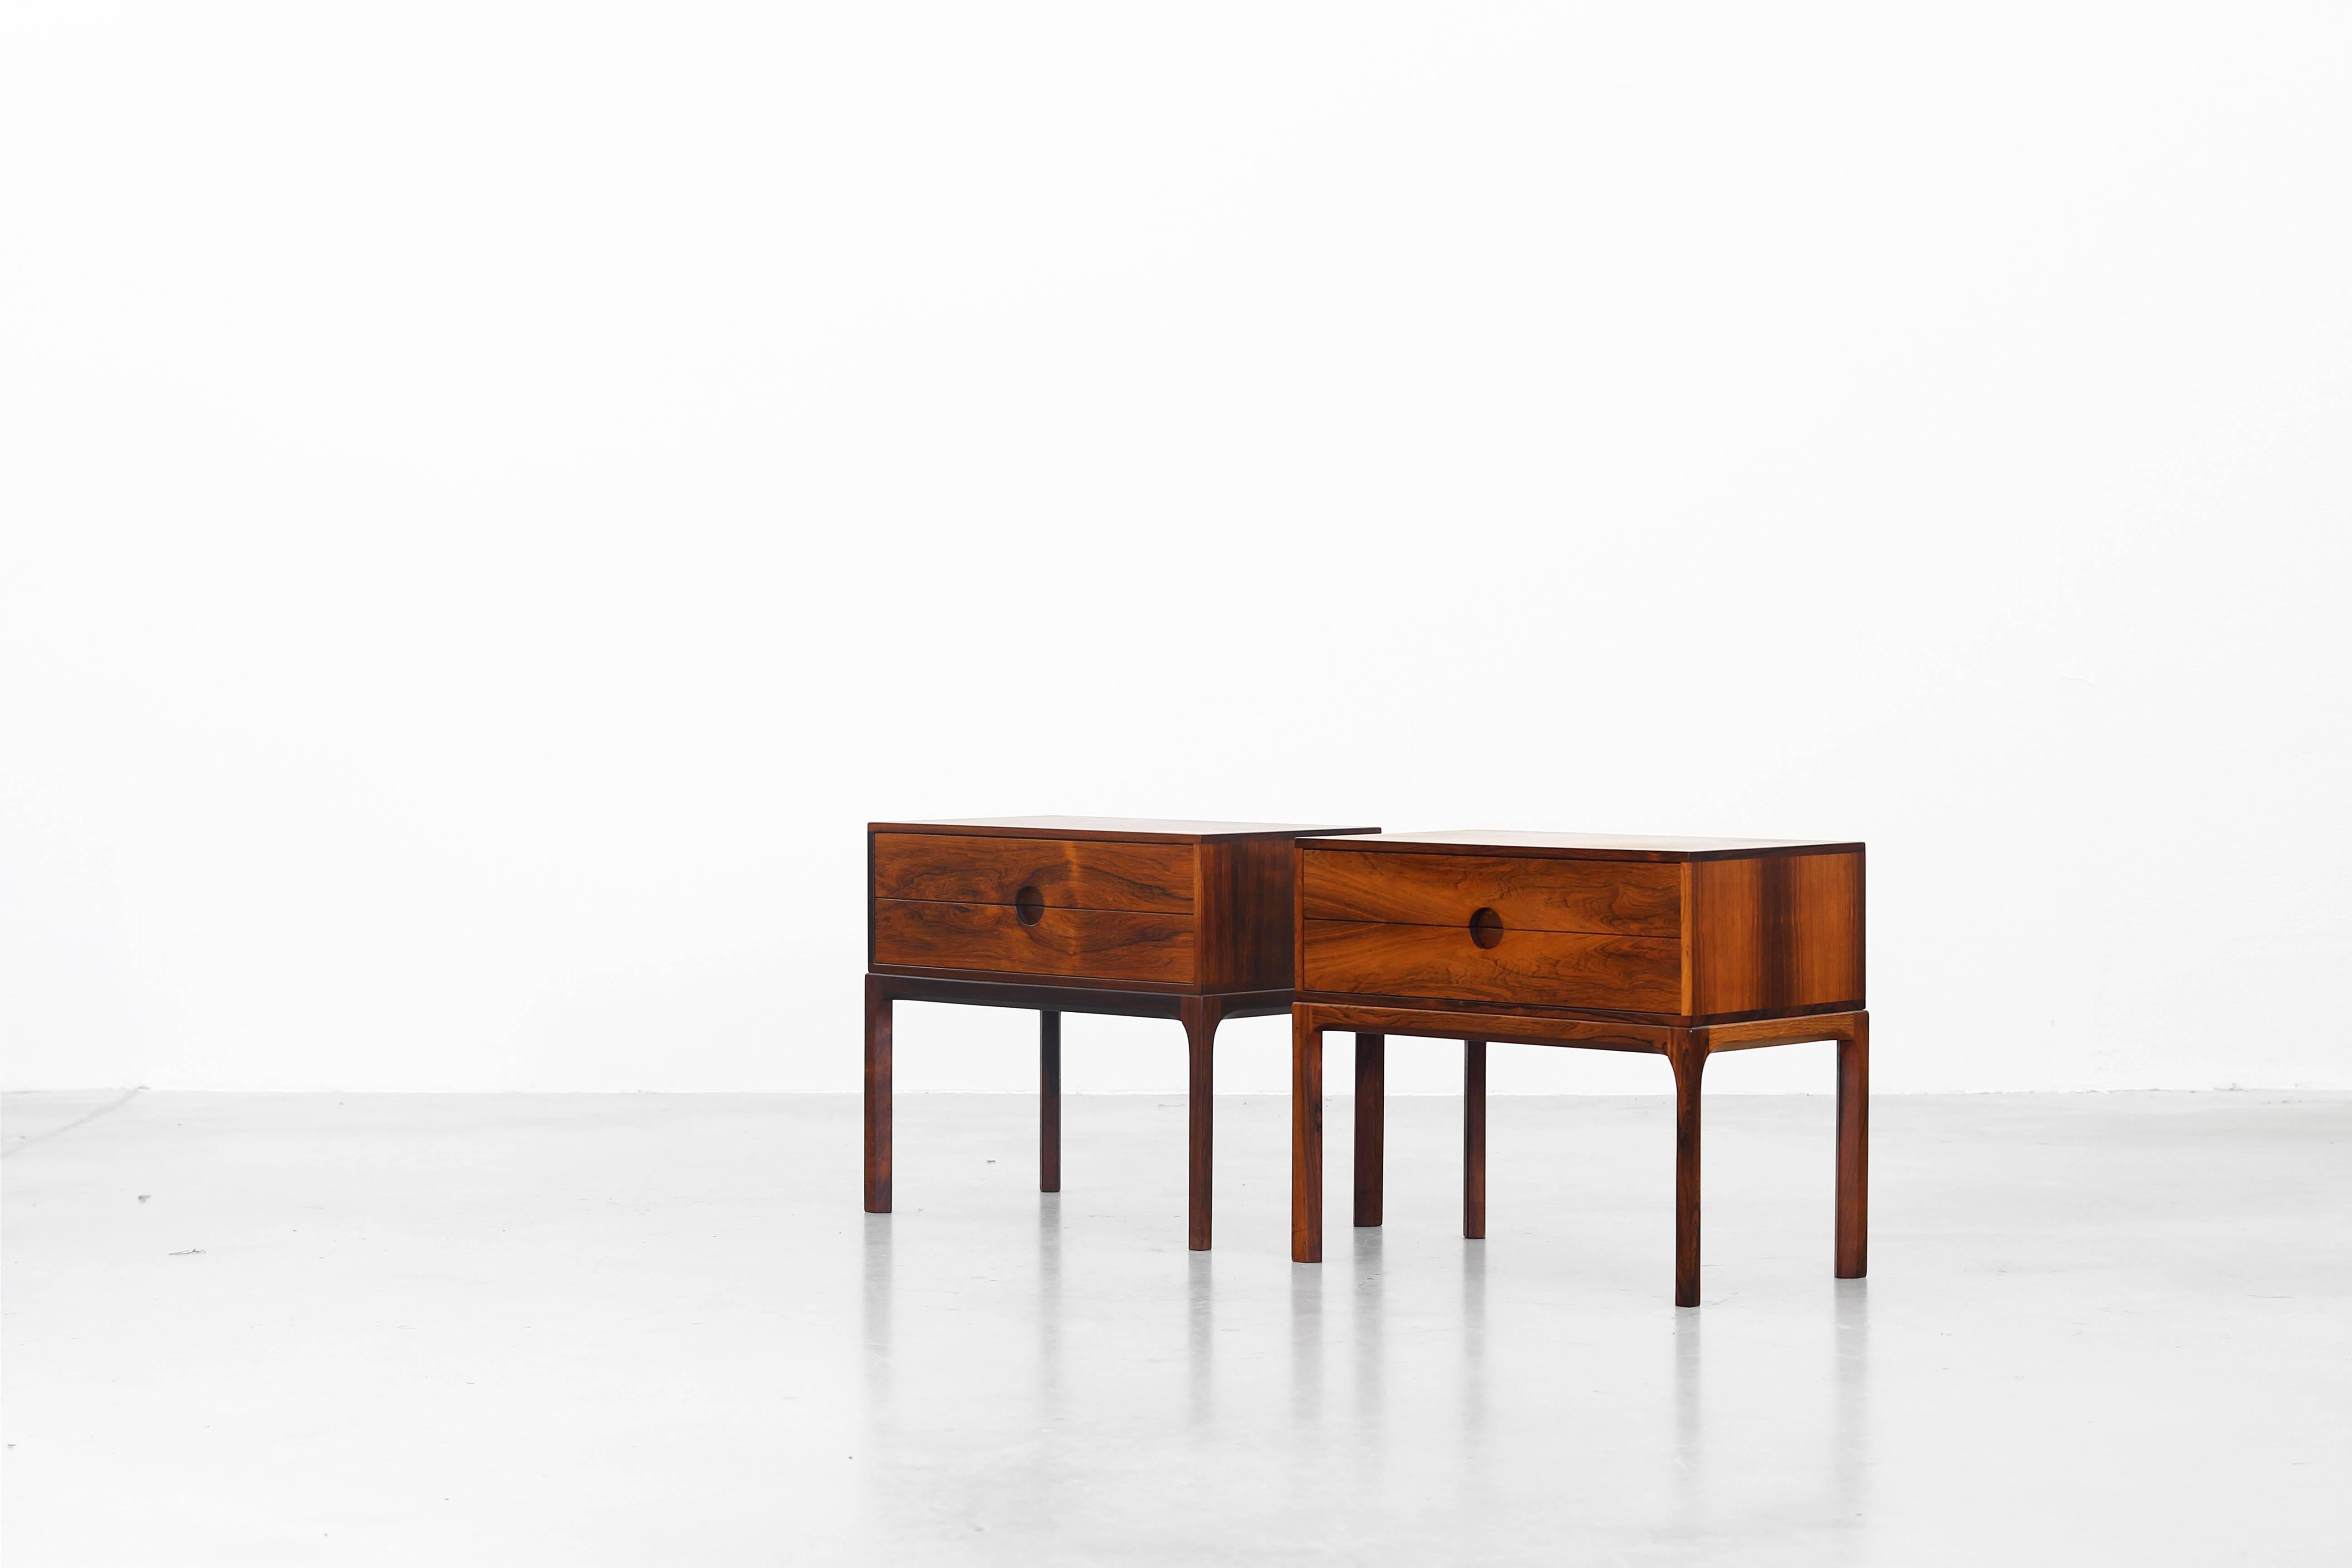 A beautiful pair of nightstands designed by Aksel Kjersgaard in 1955 in Denmark.
They are made of rosewood and still in a very good original condition.